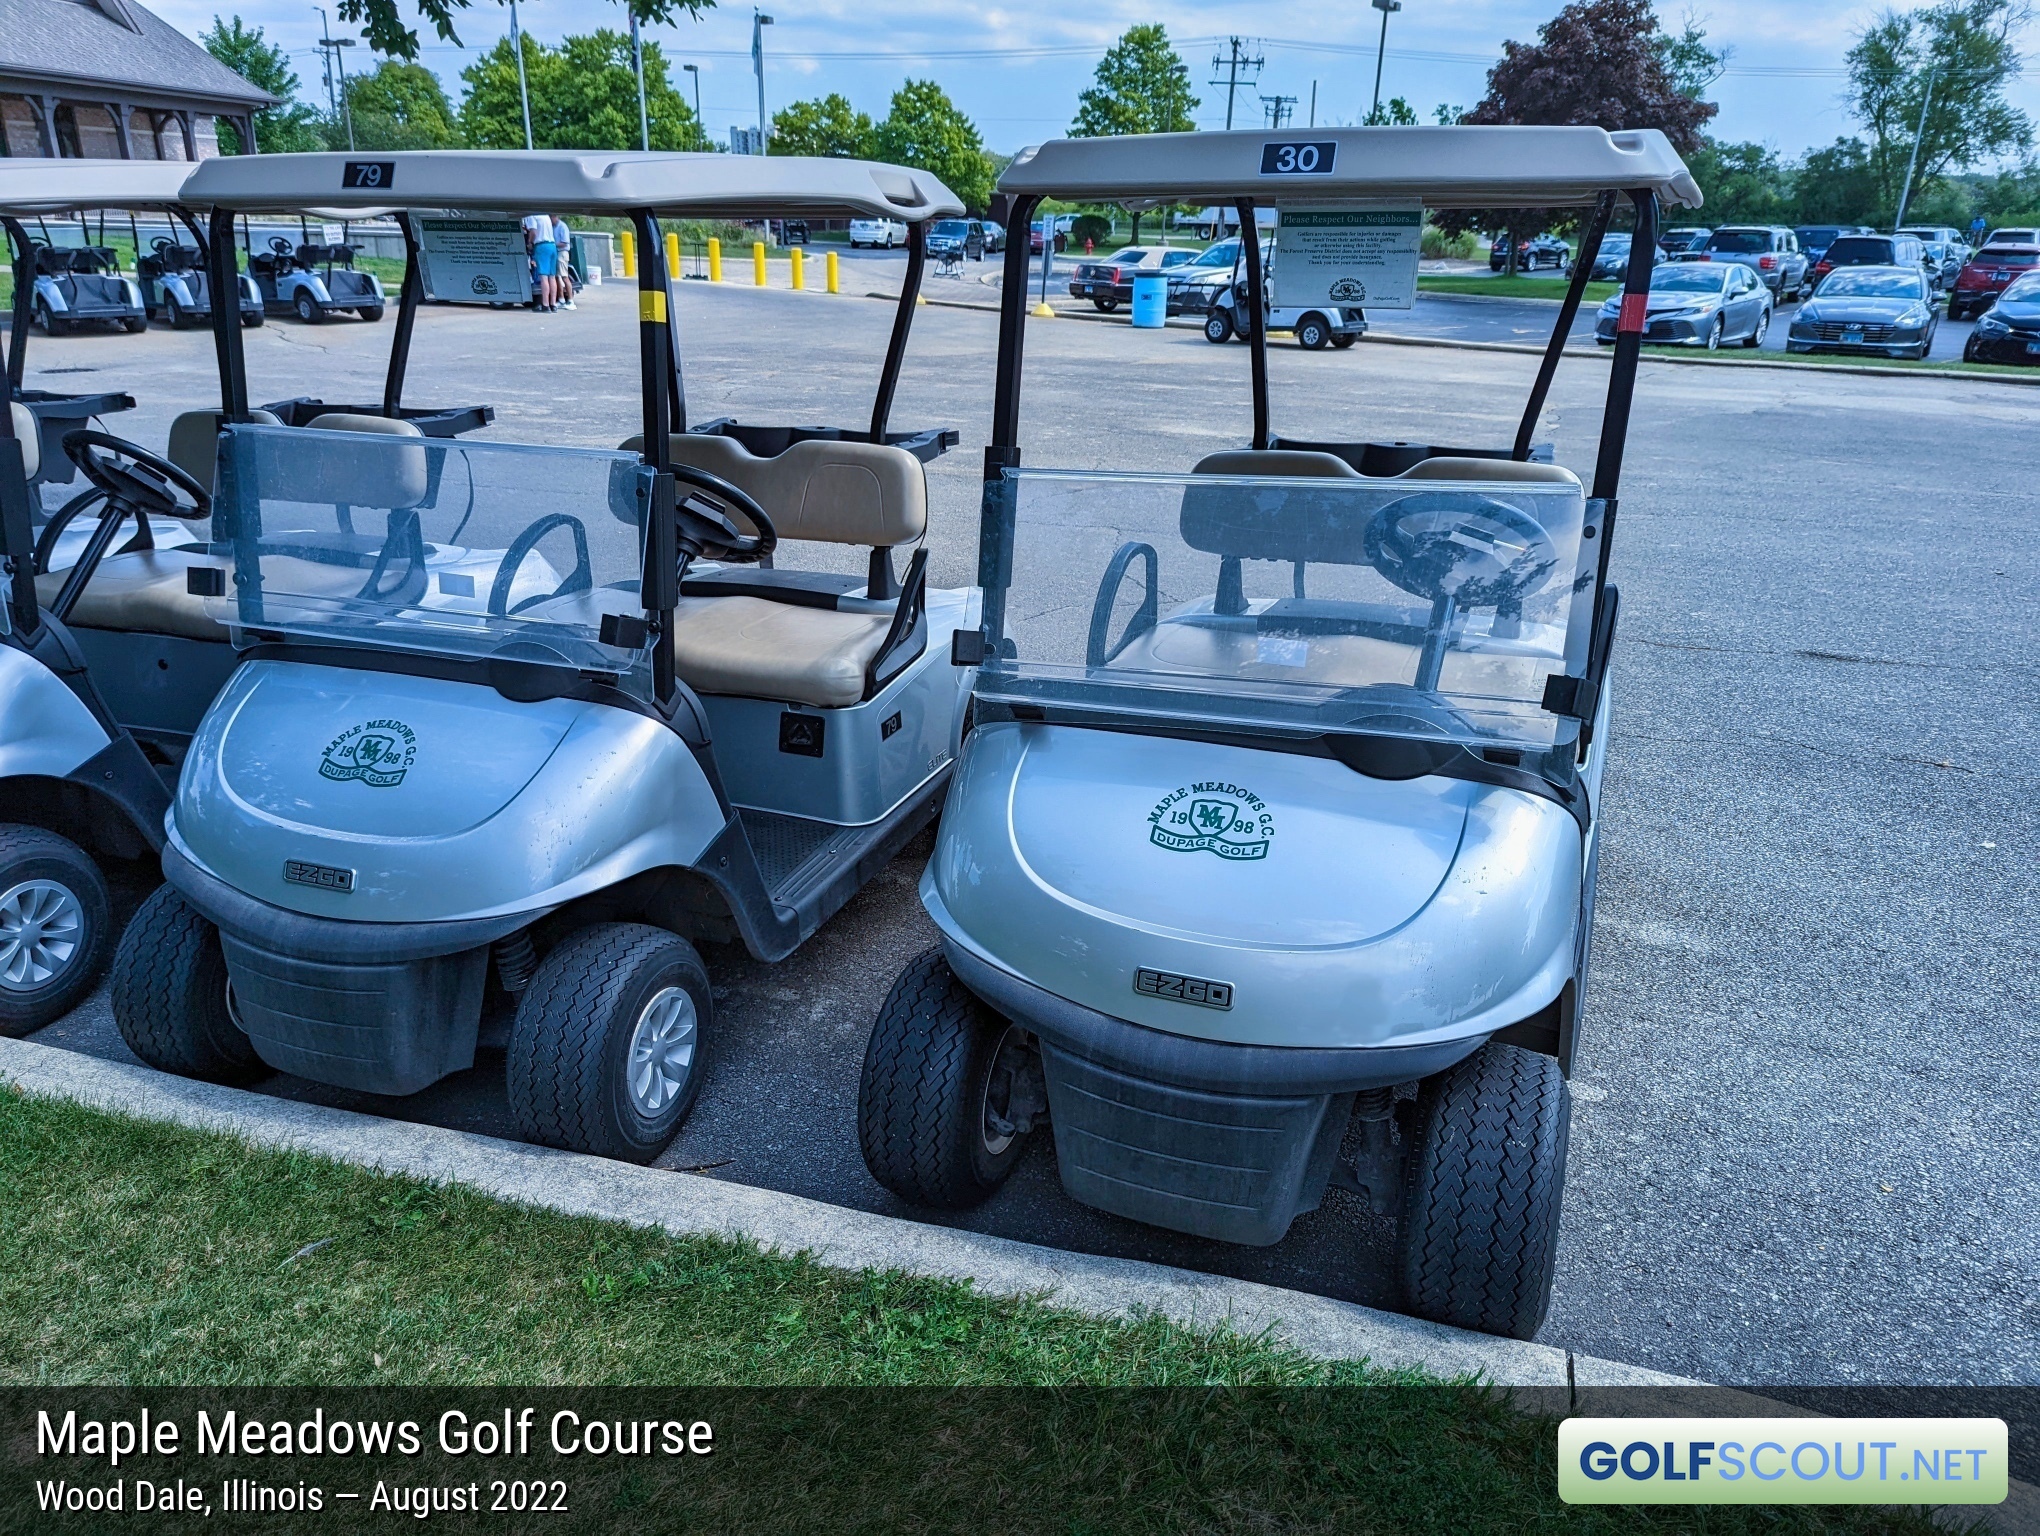 Photo of the golf carts at Maple Meadows Golf Course in Wood Dale, Illinois. 